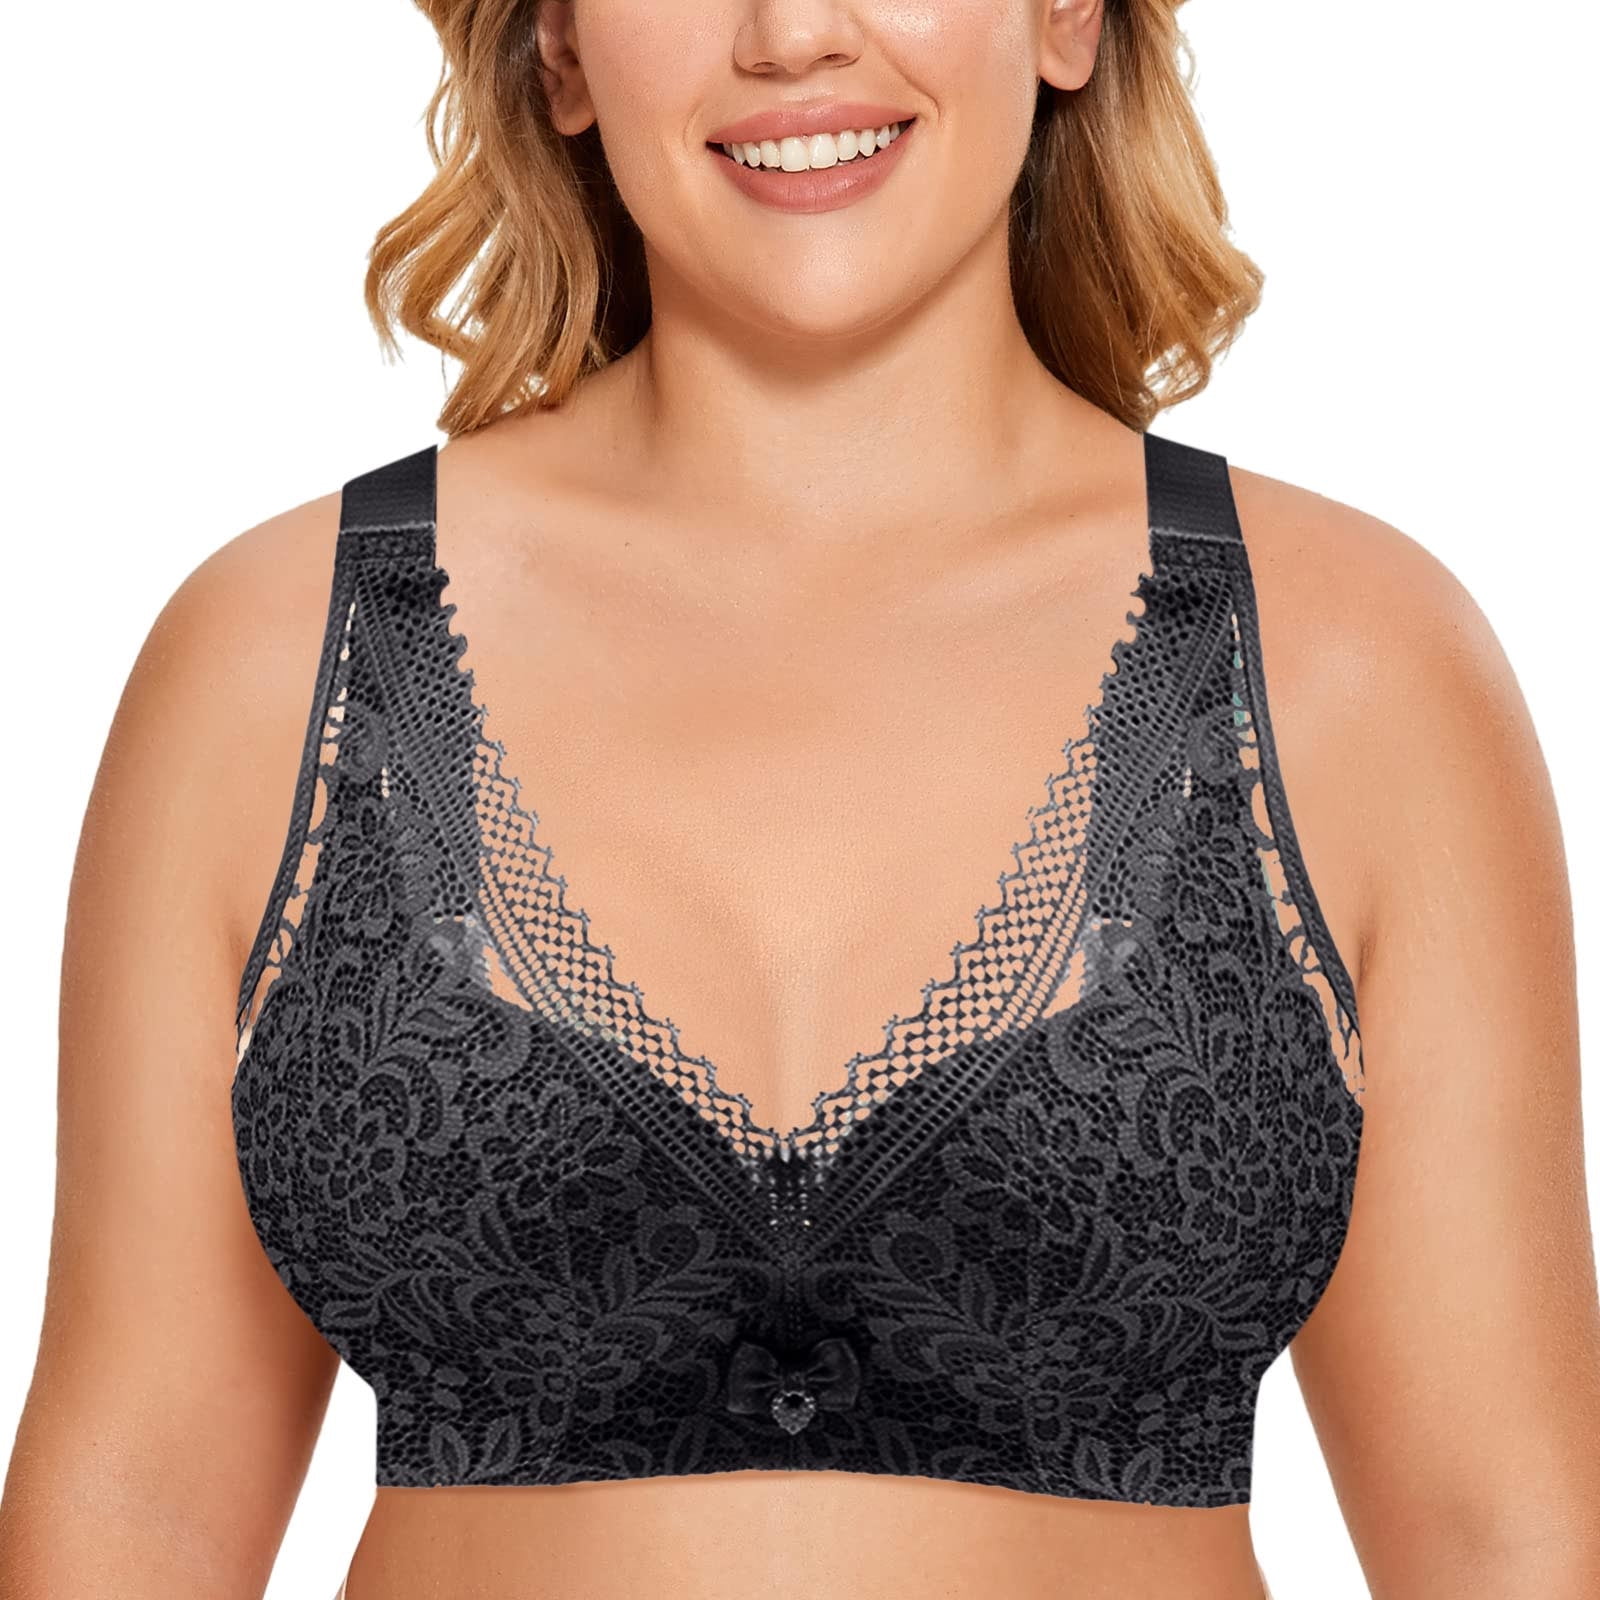 adviicd Bras Women's No Side Effects Underarm-Smoothing Comfort